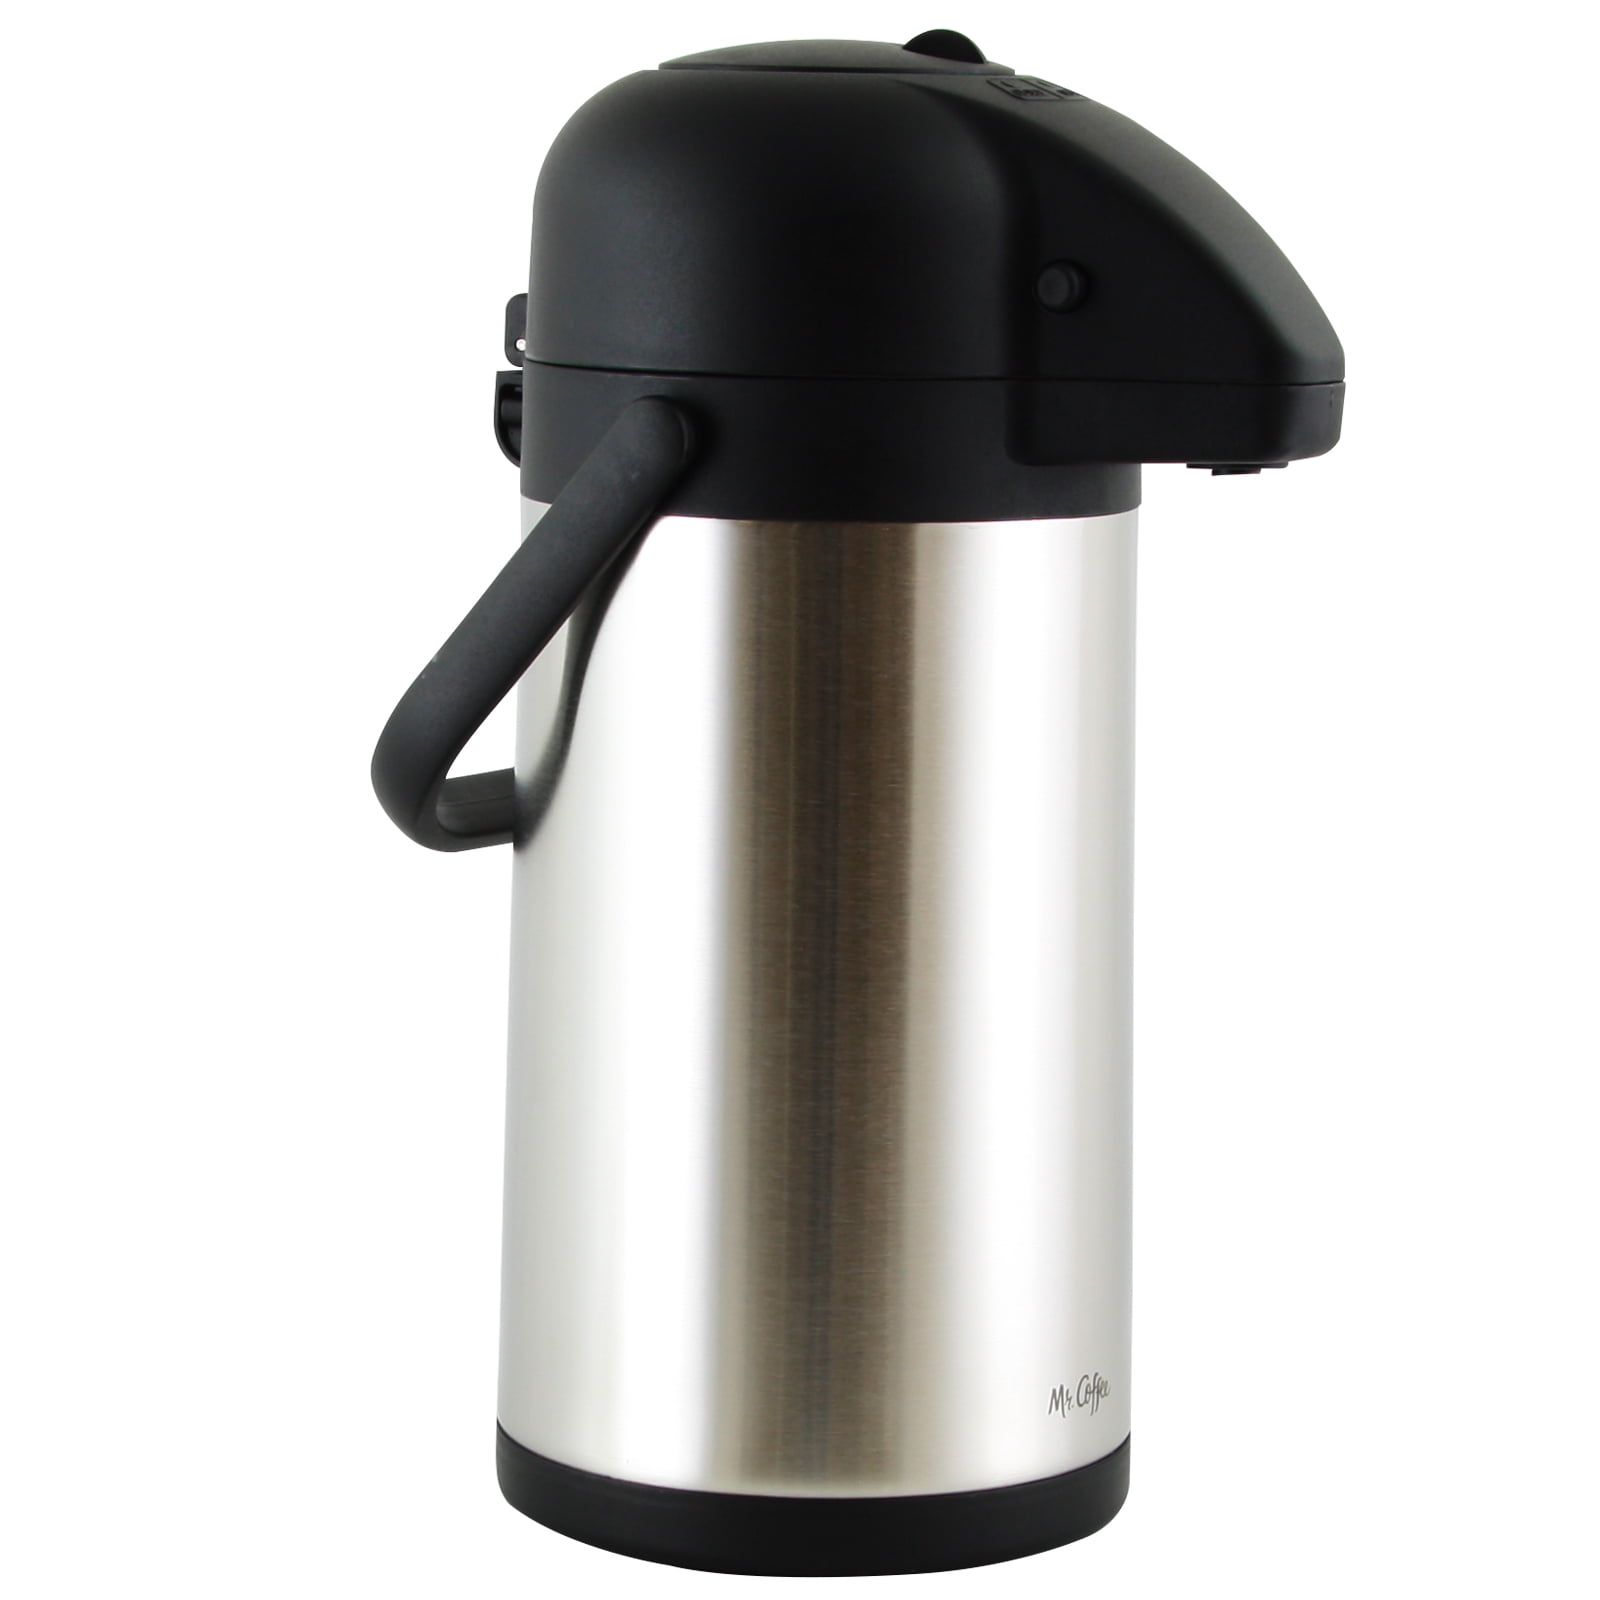 NEW THERMOS BRAND 2 QT. INSULATED PUMP POT HOT LIQUID 12hrs COLD 24hrs